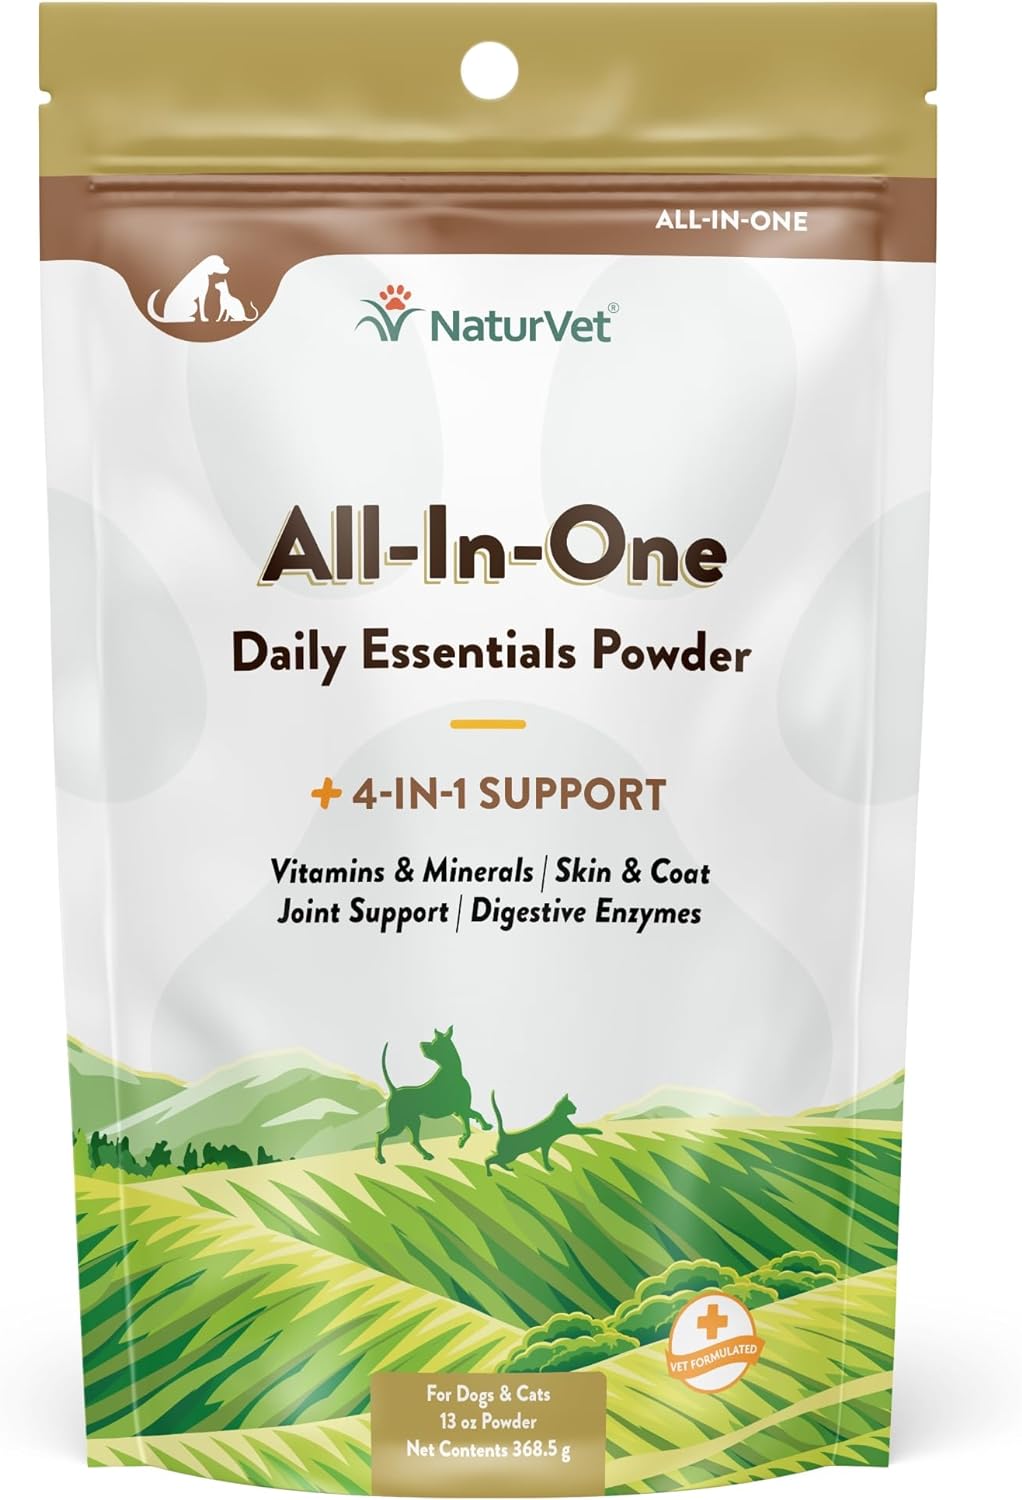 NaturVet All-in-One Dog Supplement - for Joint Support, Digestion, Skin, Coat Care – Dog Multivitamins with Minerals, Omega-3, 6, 9 – Wheat-Free Vitamins for Dogs – 13-Ounce Powder